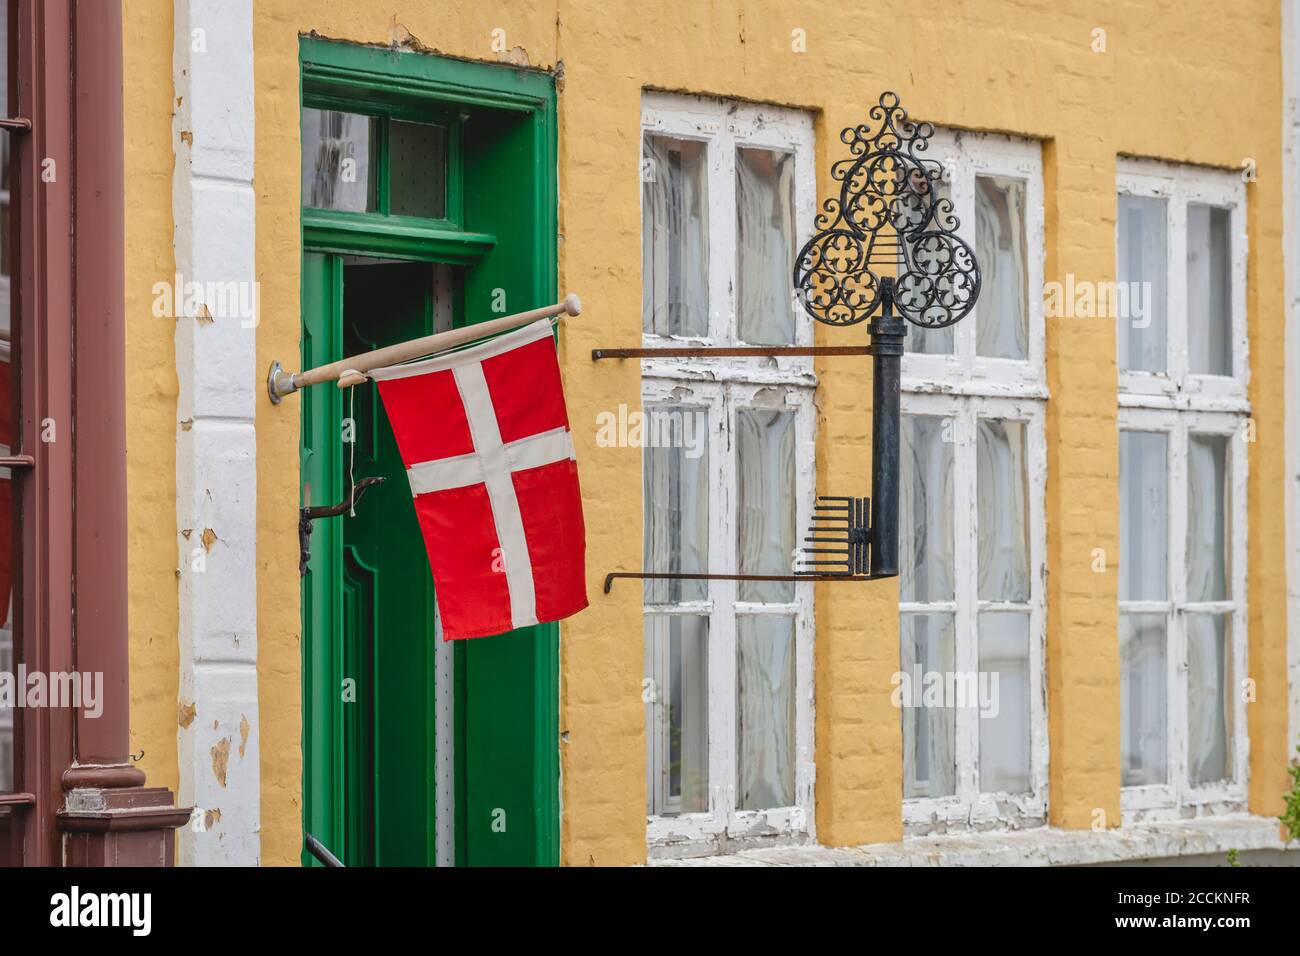 Danish flag hanging outside old building Stock Photo